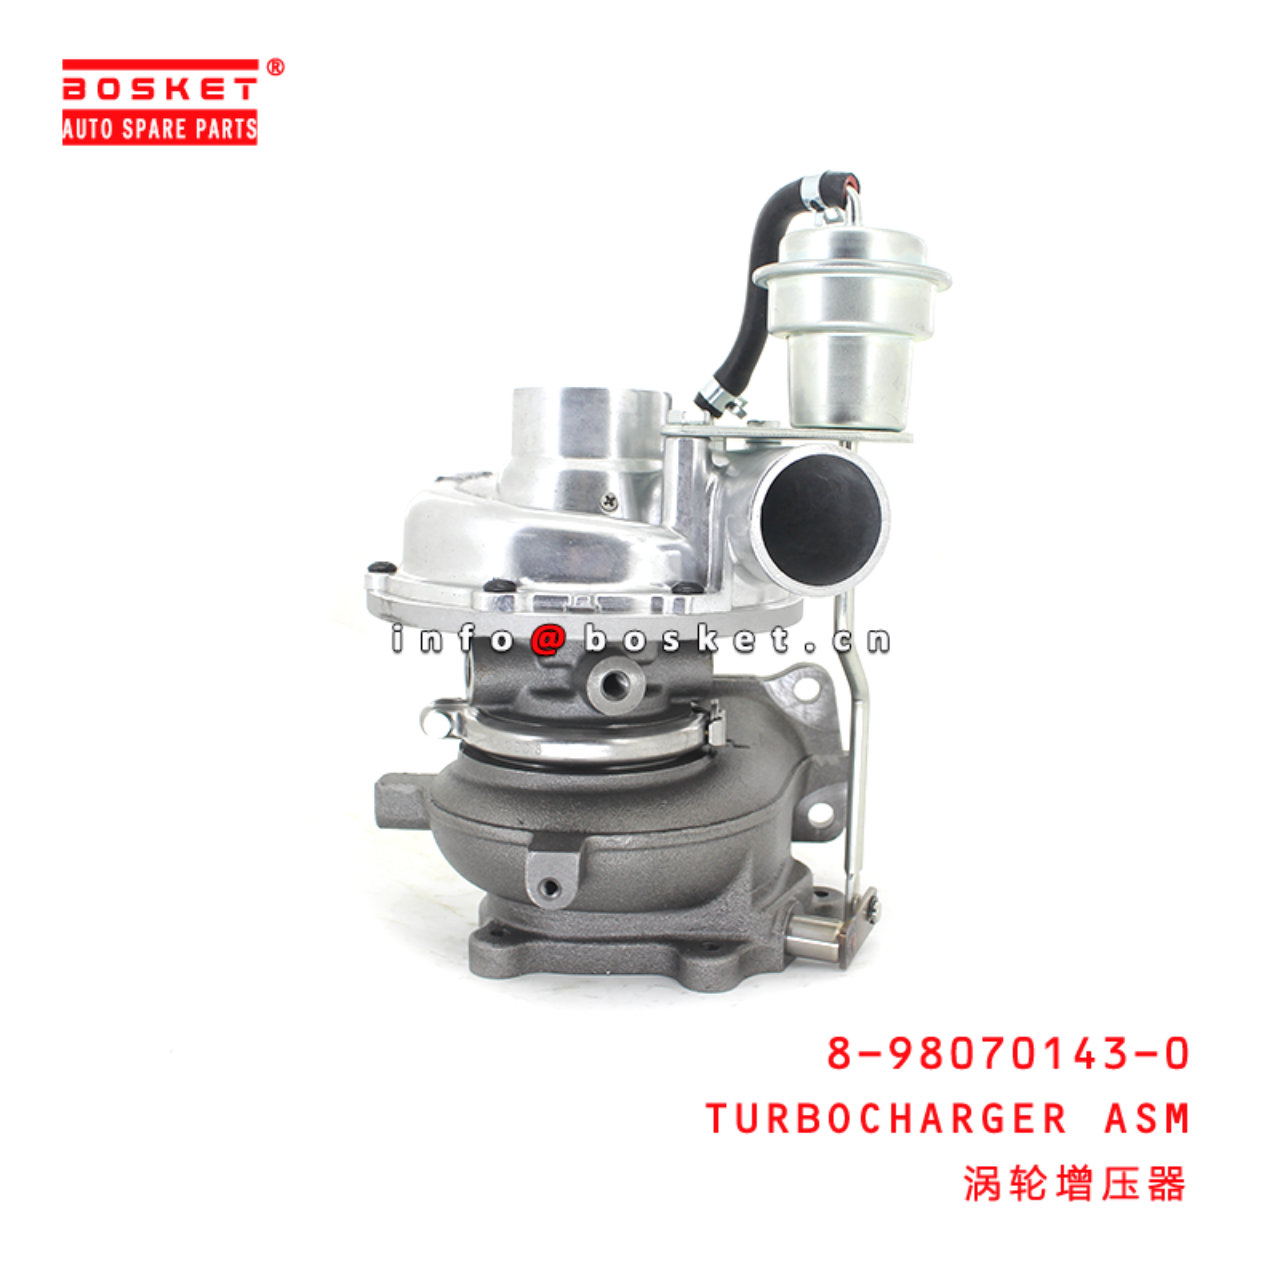 8-98070143-0 Turbocharger Assembly suitable for ISUZU 4HK1 8980701430